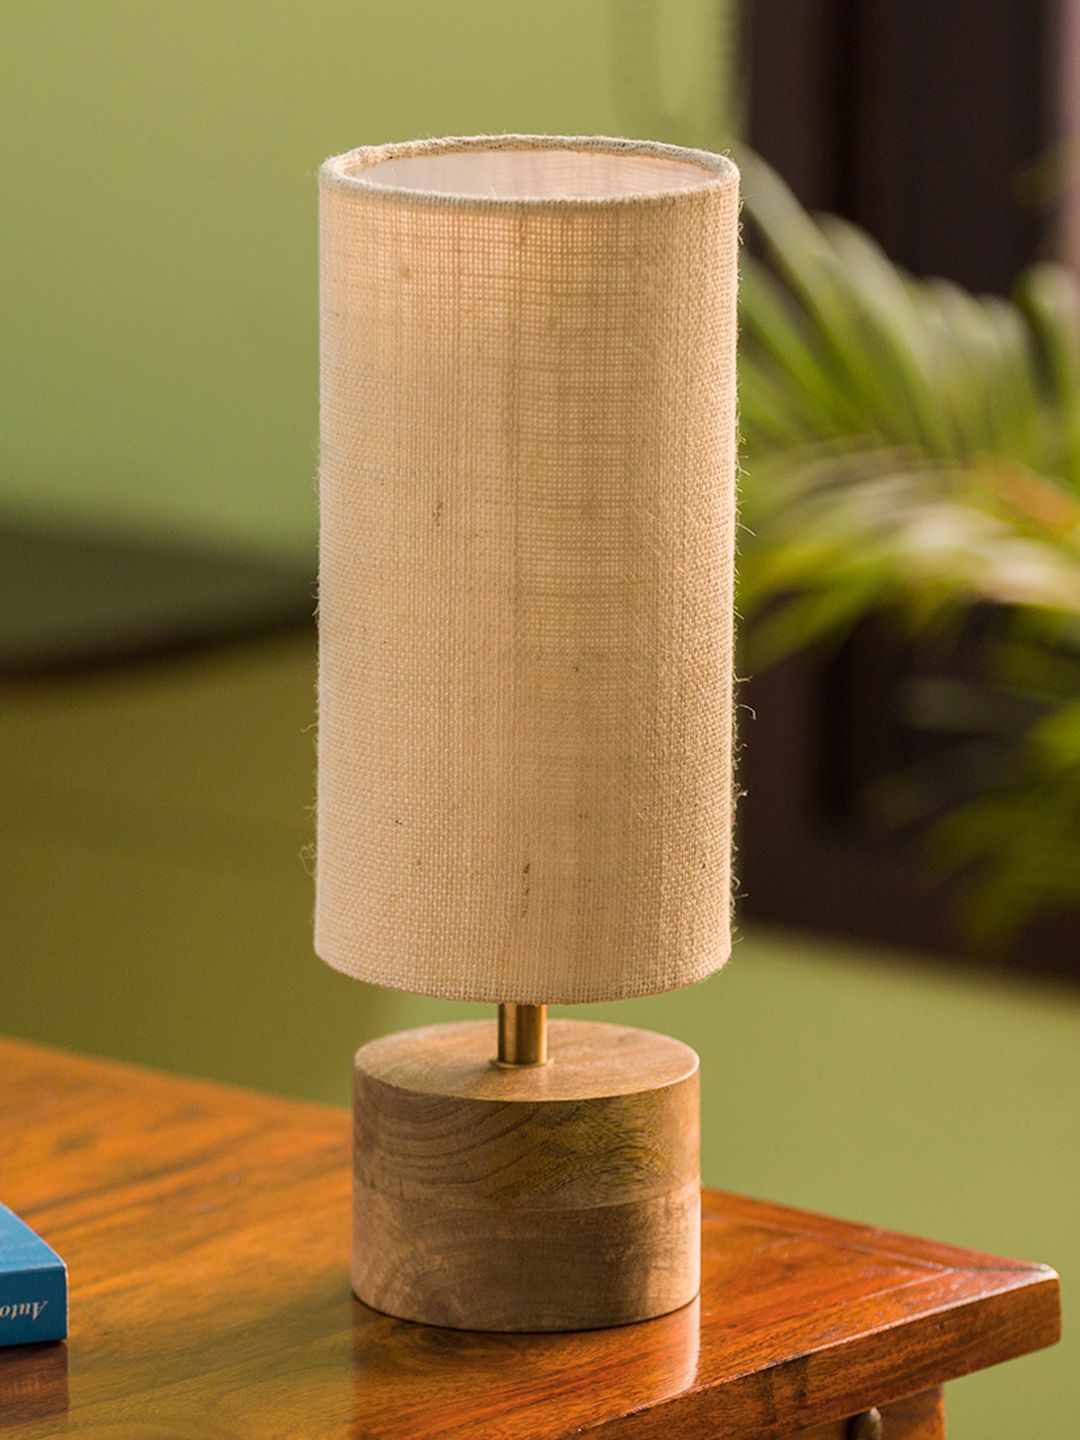 ExclusiveLane Beige 14 inch Round Mango Wooden Table Lamp with Shade Price in India